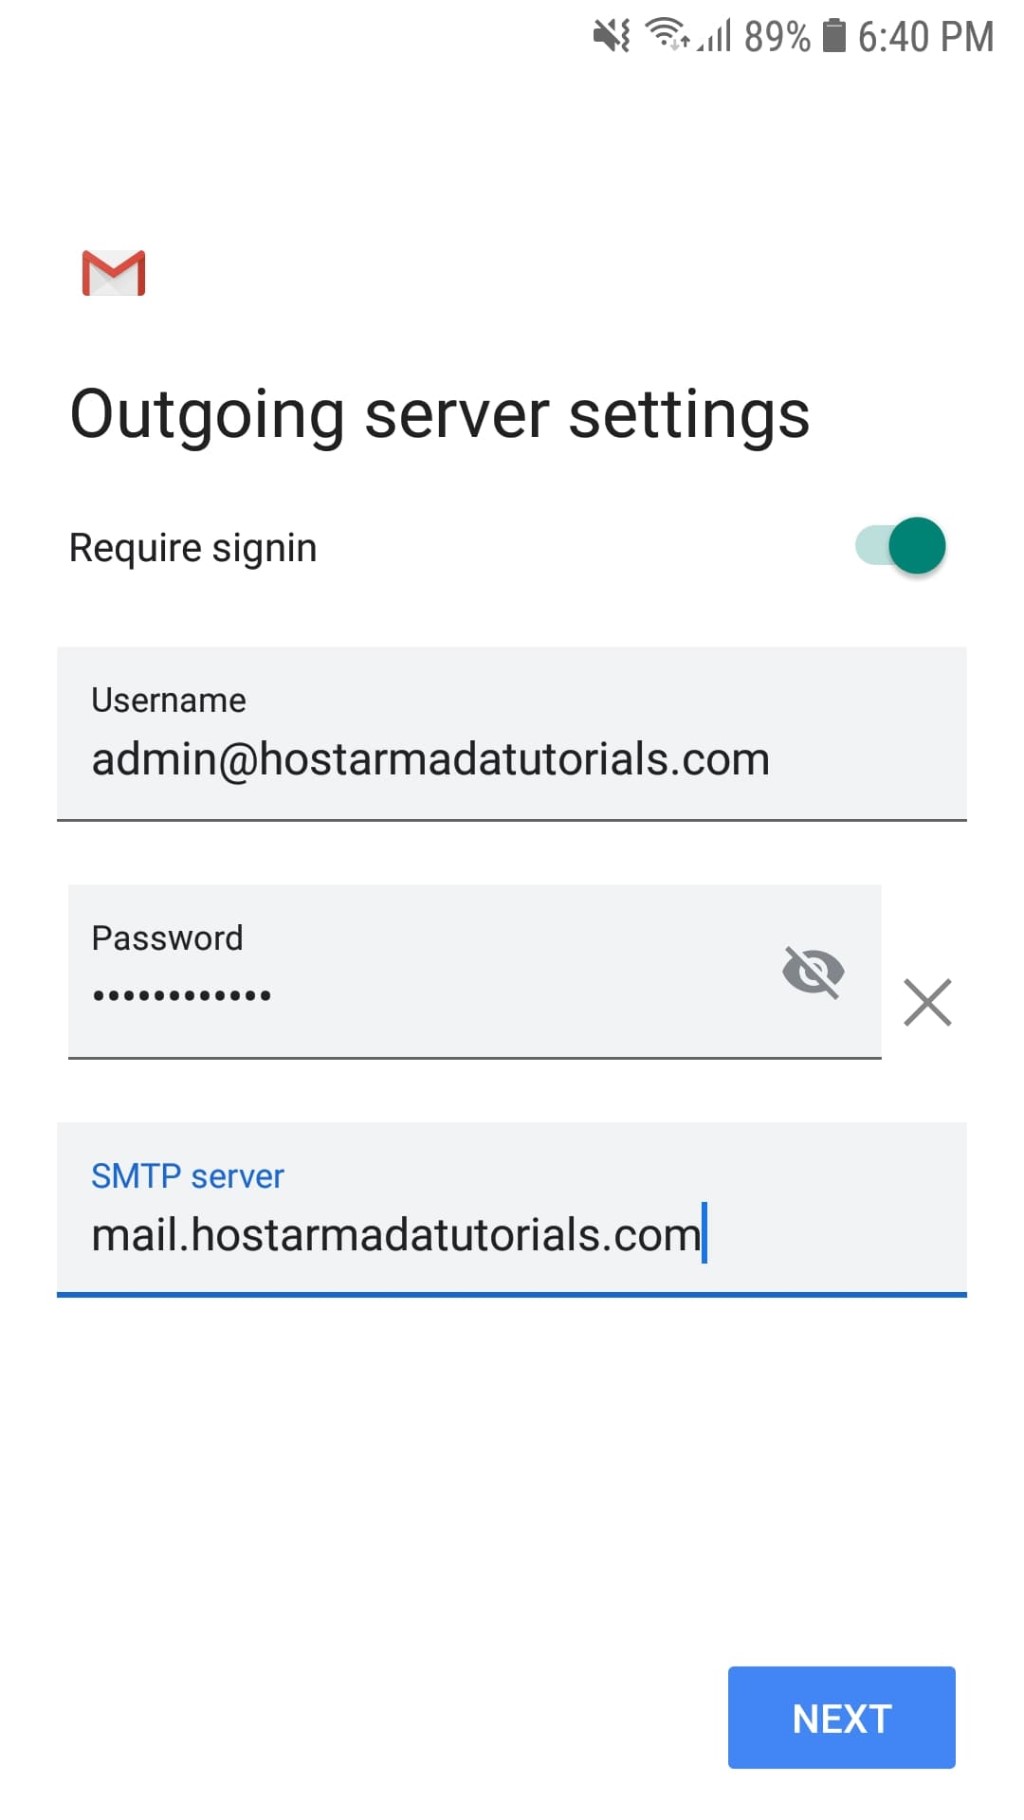 Configuring Outgoing server settings